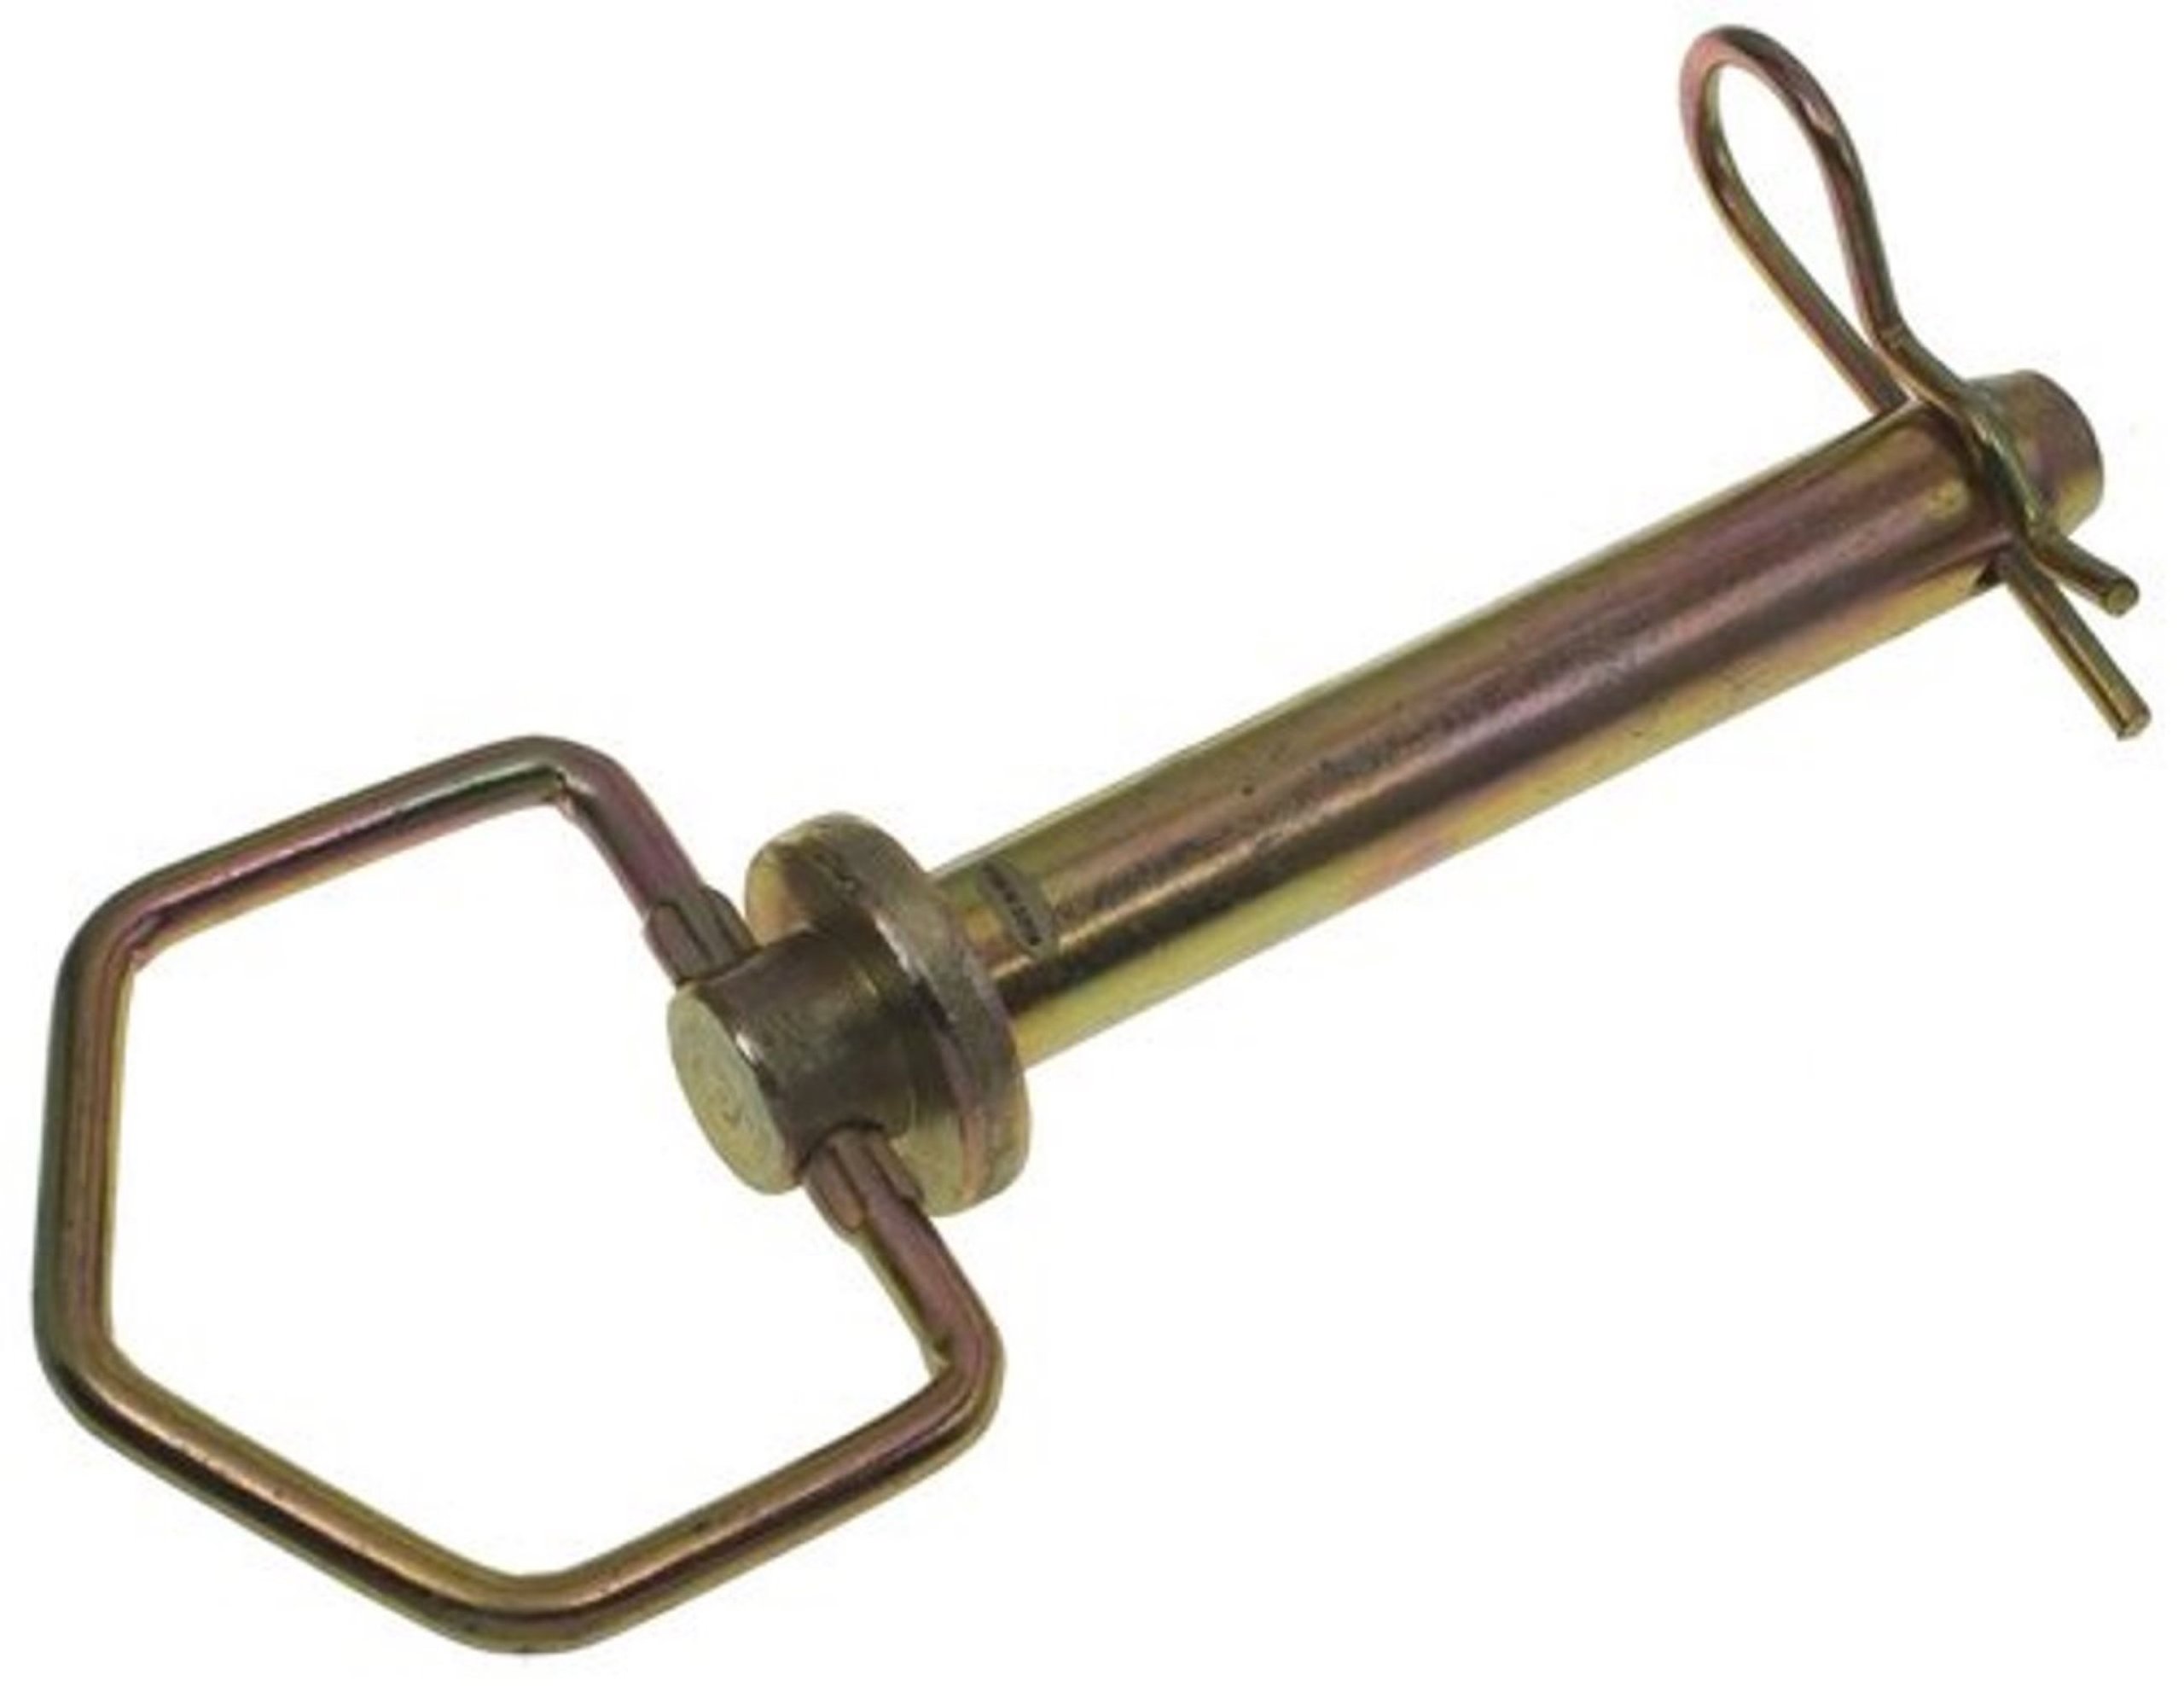 SPECIAL PRODUCTS CO Special Products (Speeco) 071031c0 Hitch Pinclip Accessories for Tractors, 34 by 4-14-Inch